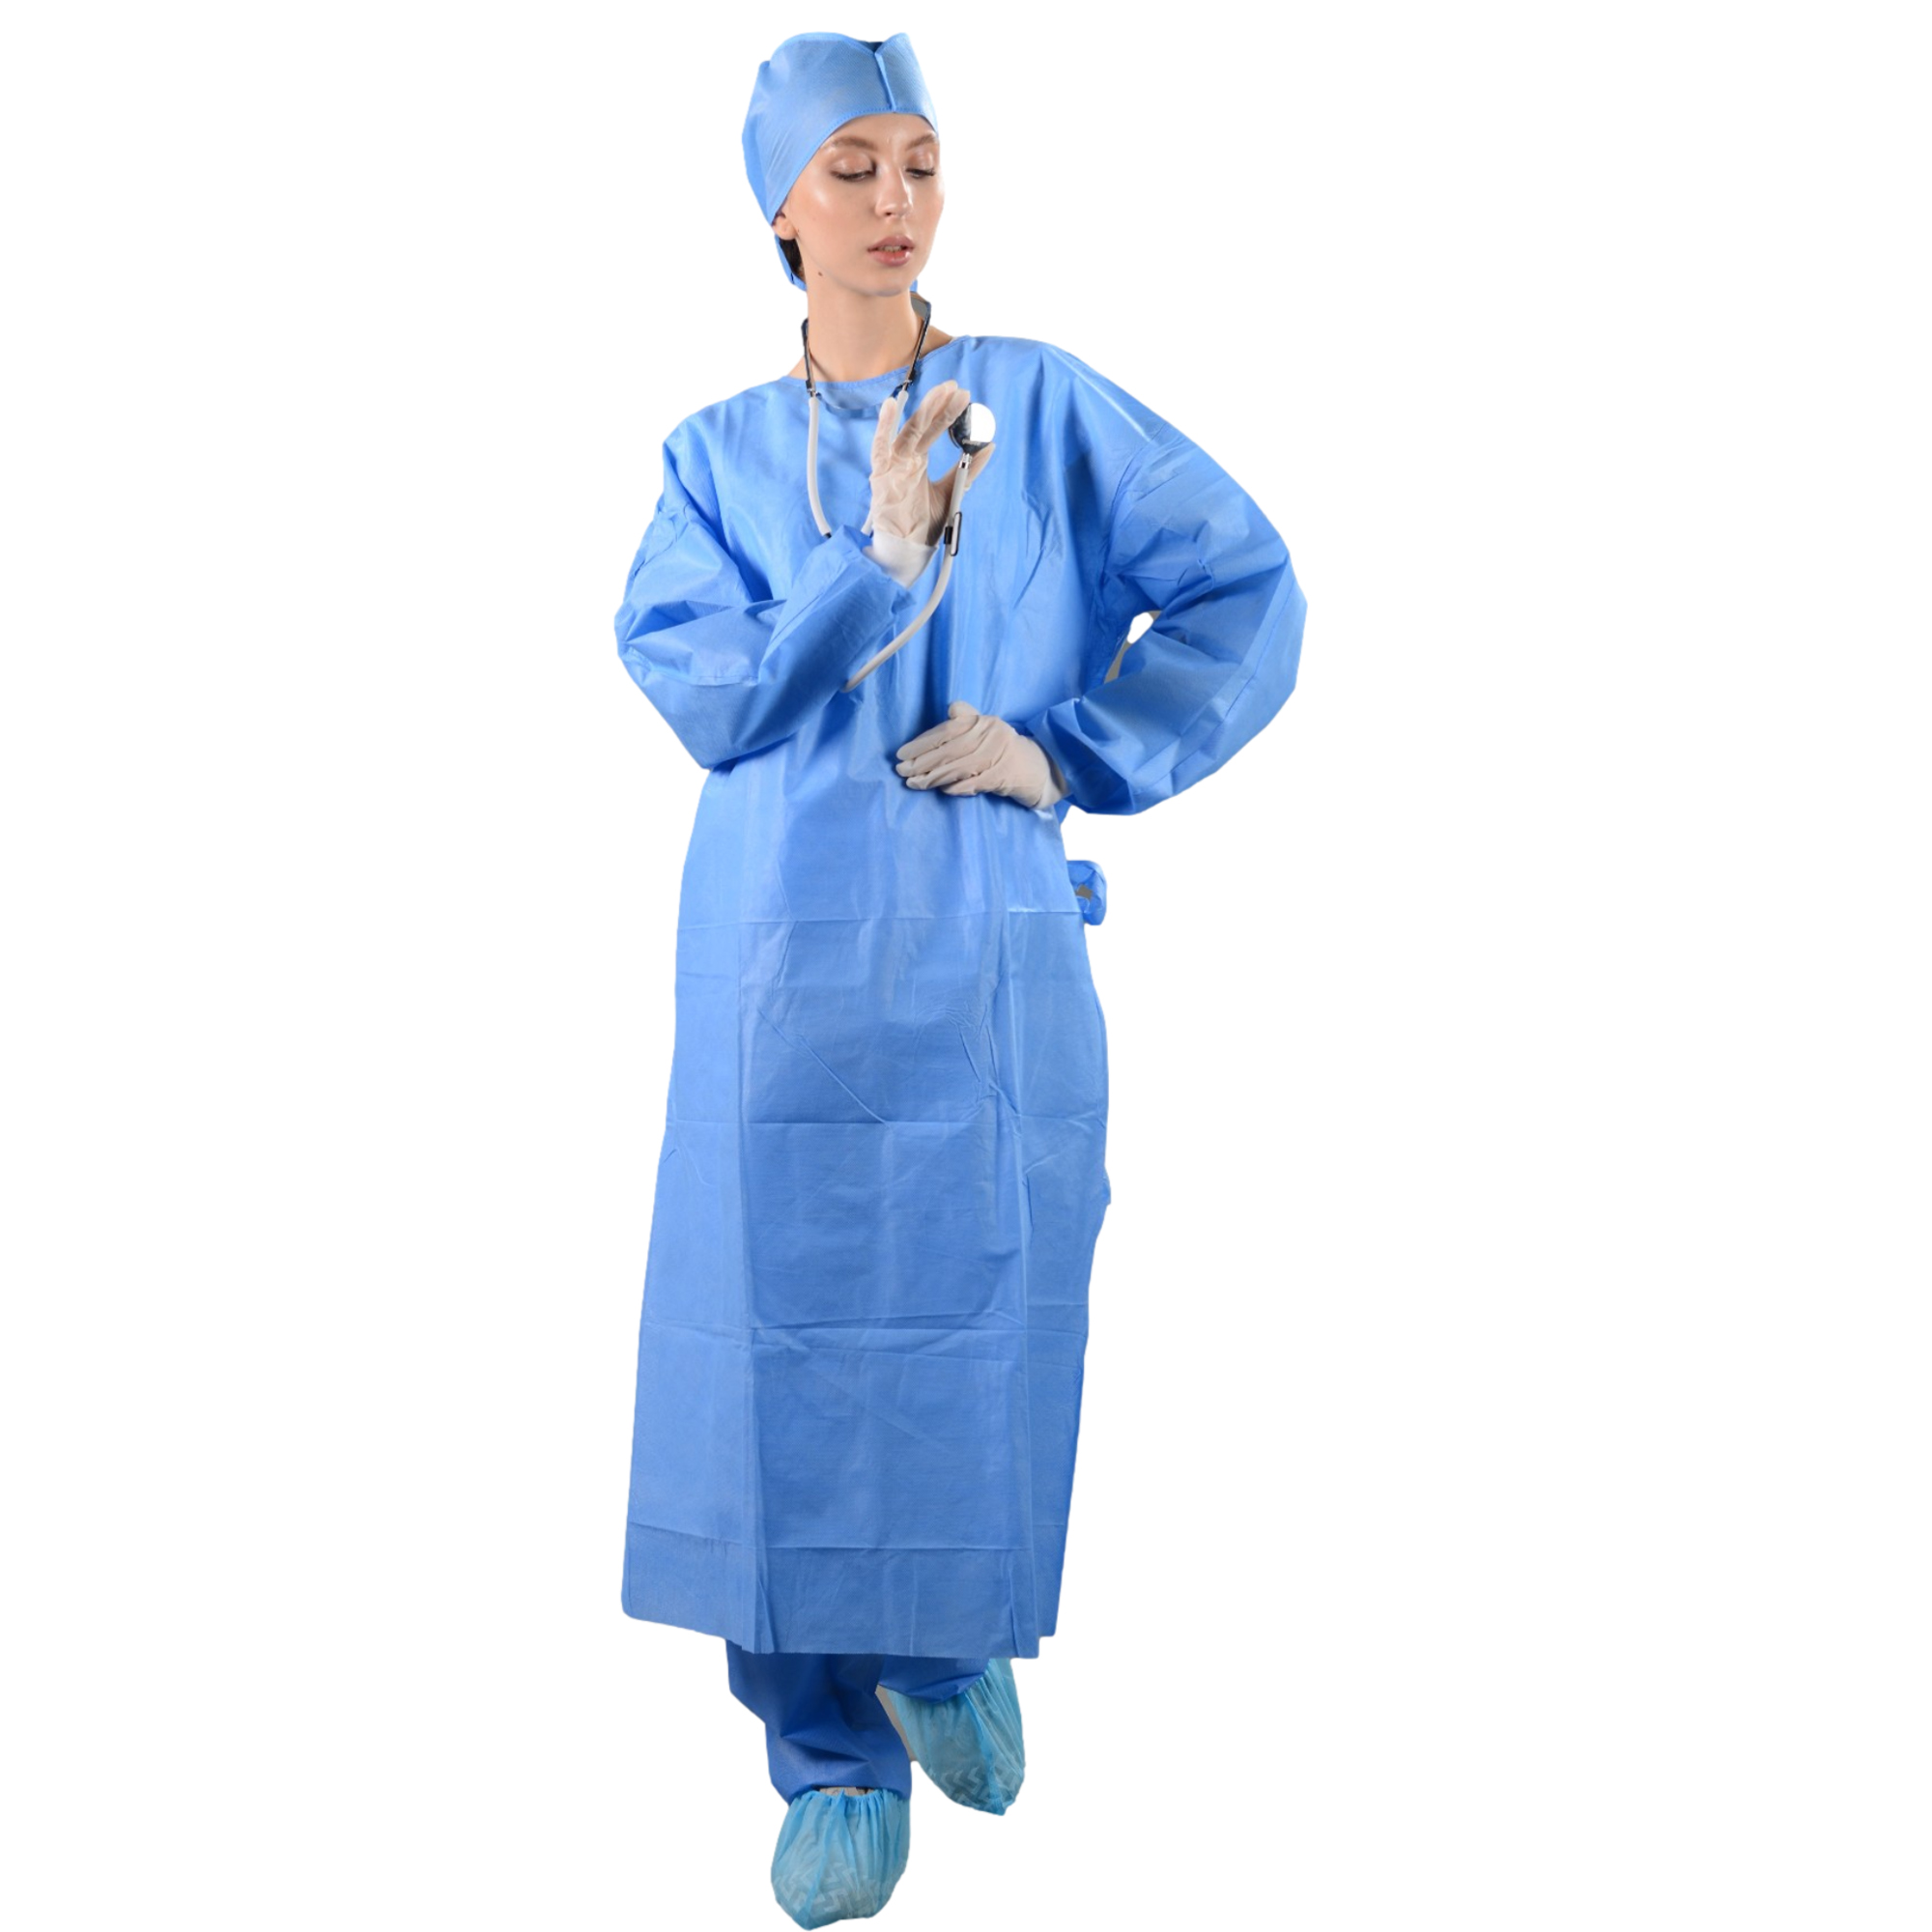 LEVEL3 Disposable SMMS surgical gown FDA surgical gowns 